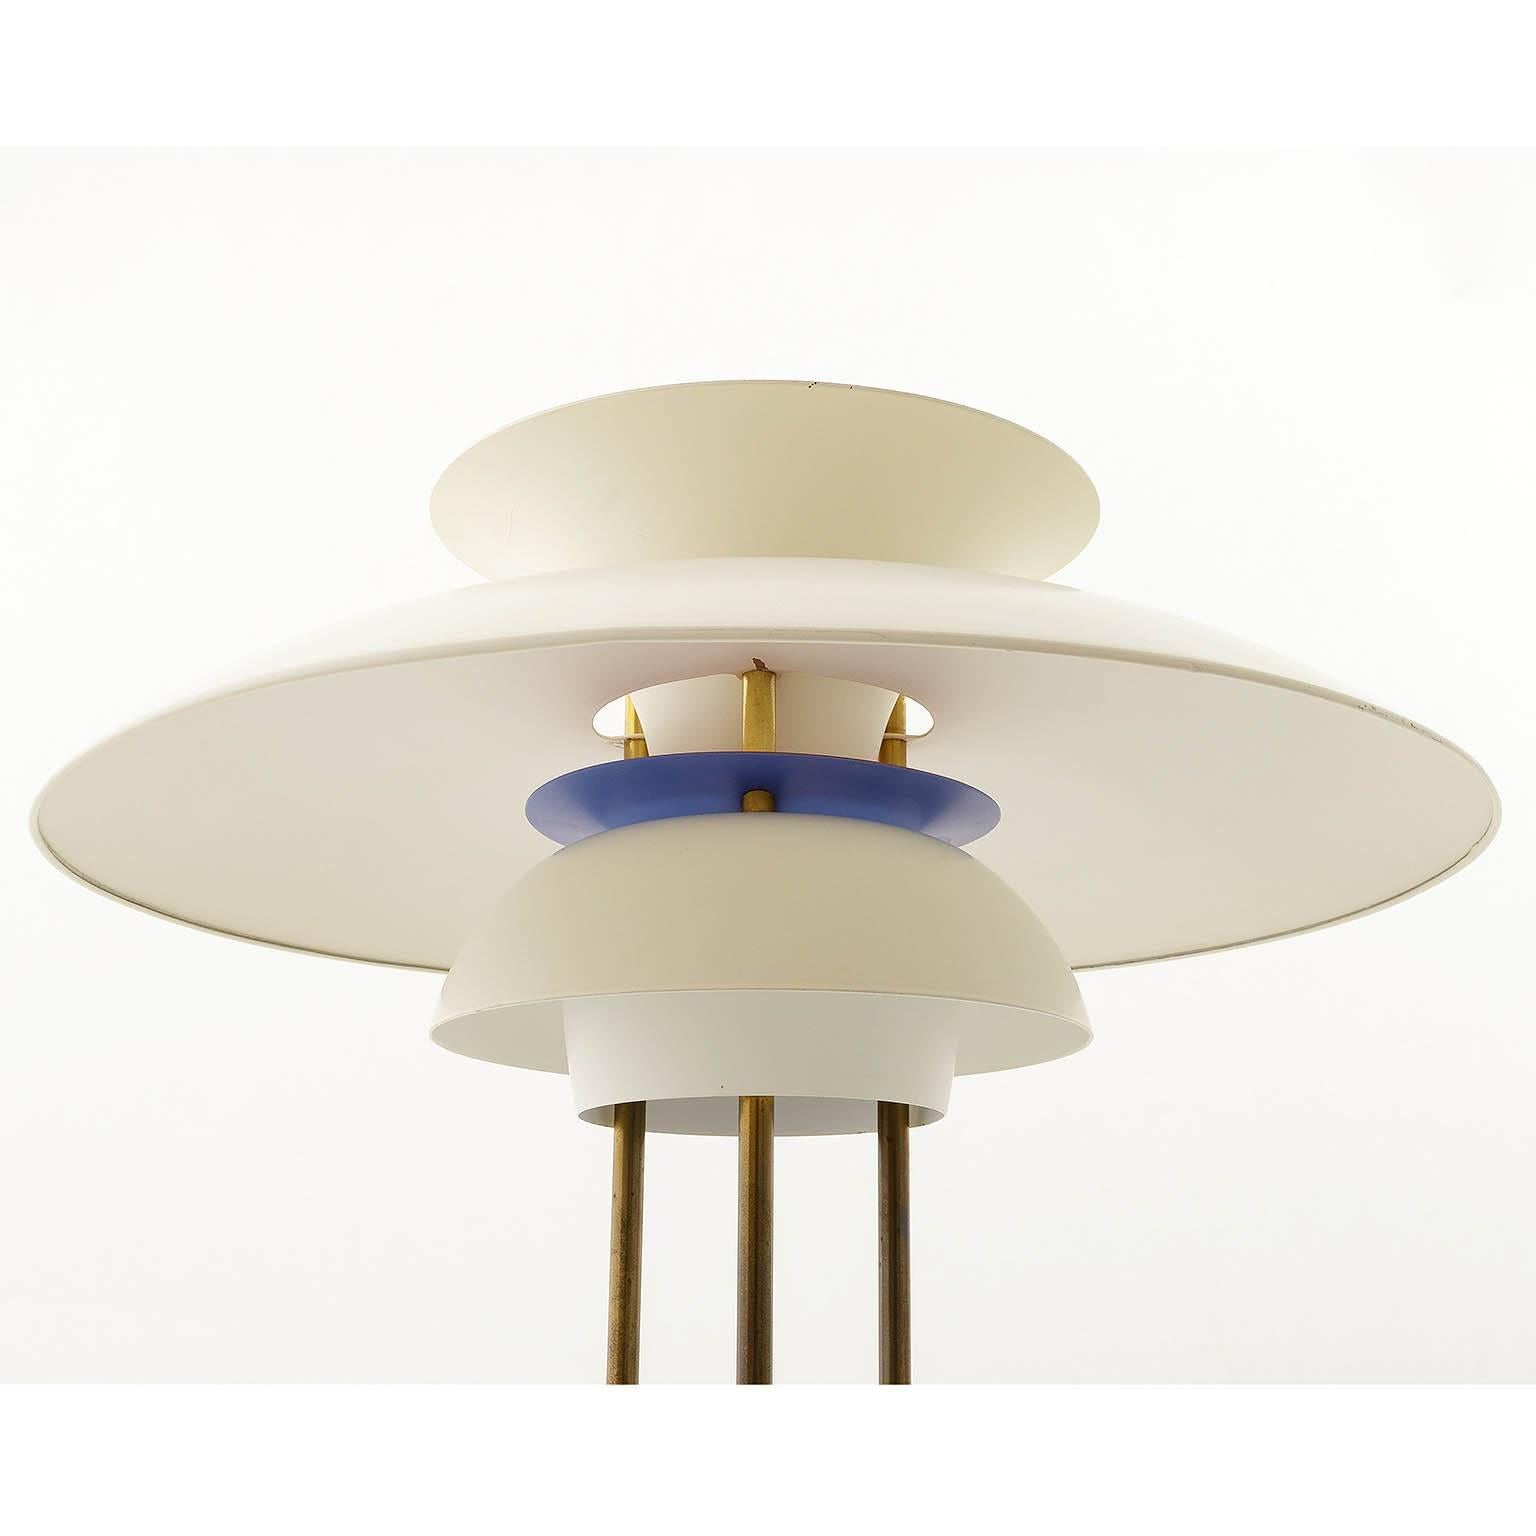 Danish Table Lamp PH5 by Poul Henningsen for Louis Poulsen, Patinated Brass, 1960s